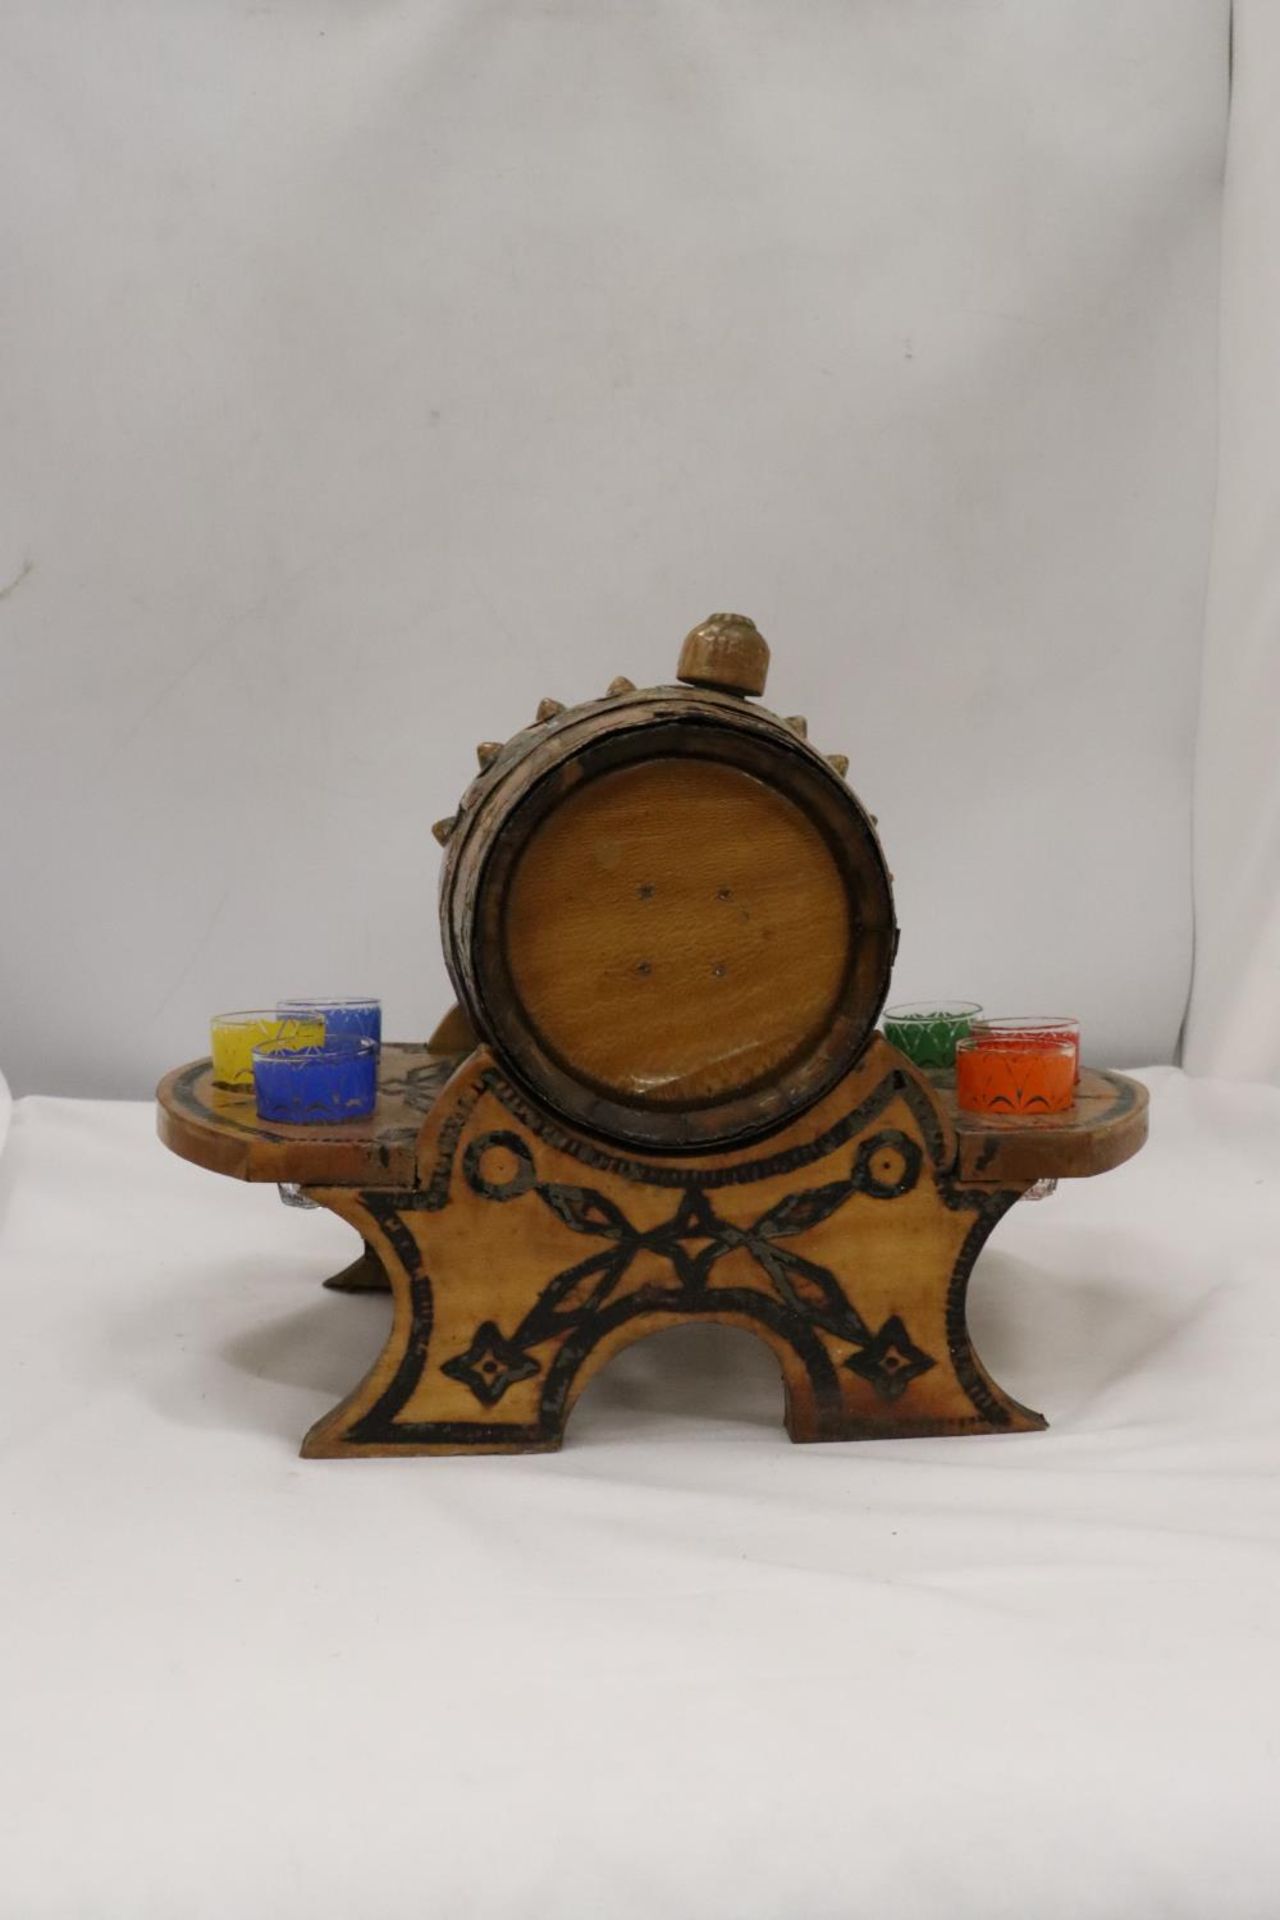 A SMALL VINTAGE BARREL WITH SIX GLASSES - 1 A/F - Image 4 of 7